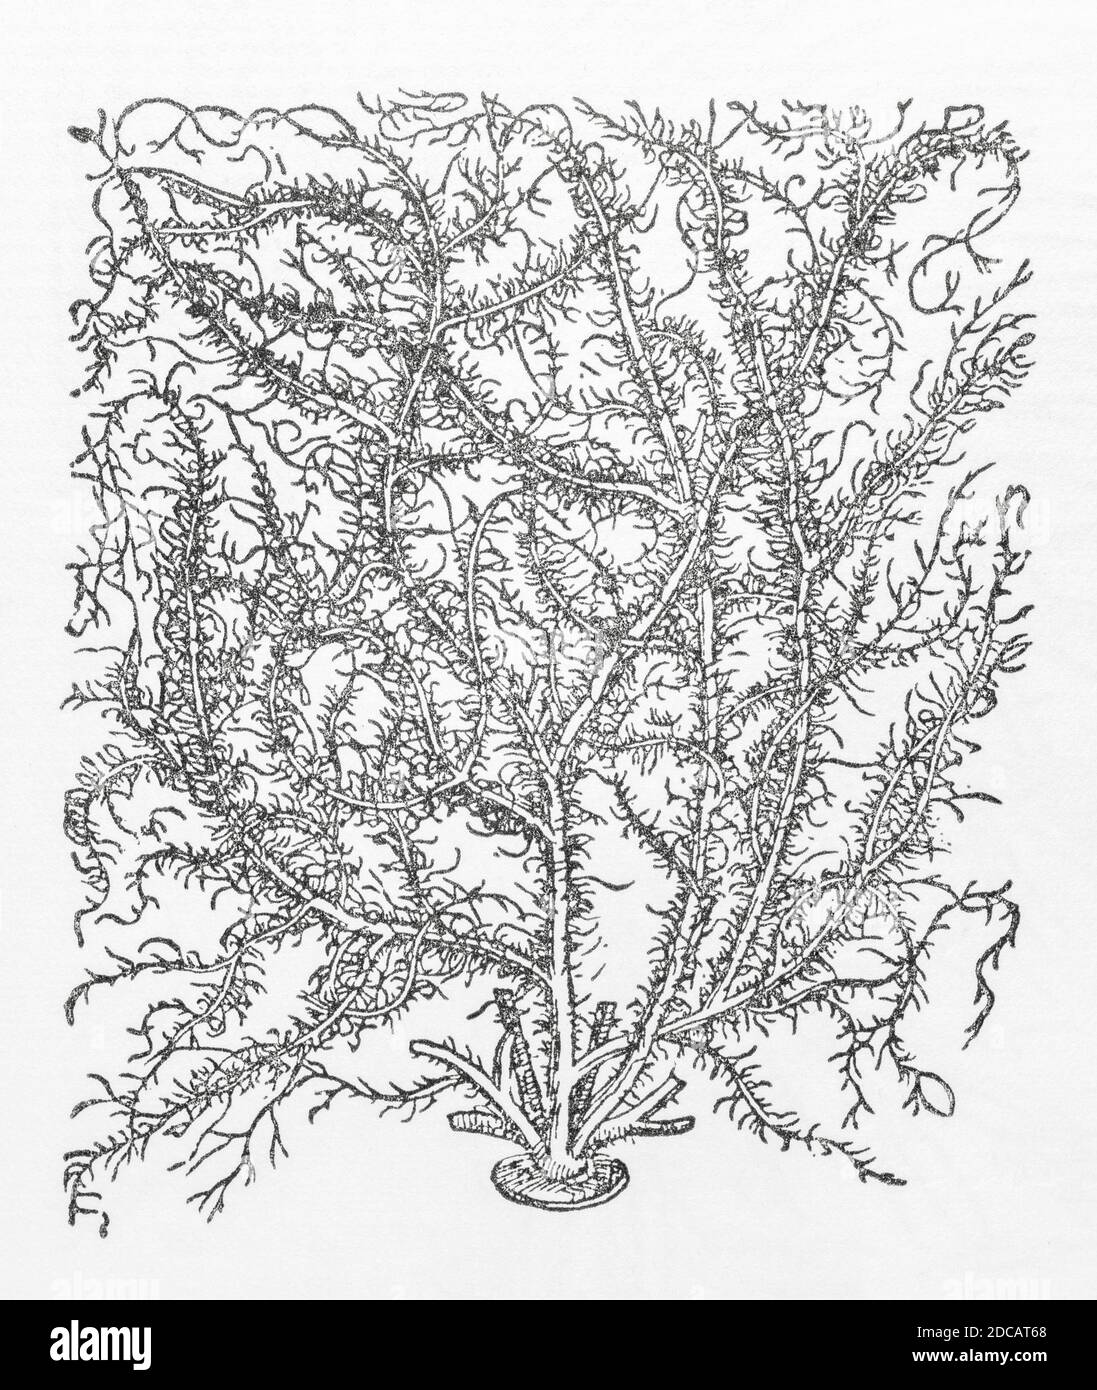 Lichen / Cupthong lichen woodcut from Gerarde's Herball, History of Plants. He refers to it as 'Branched Mosse' / Muscus ramosus. P1372 Stock Photo